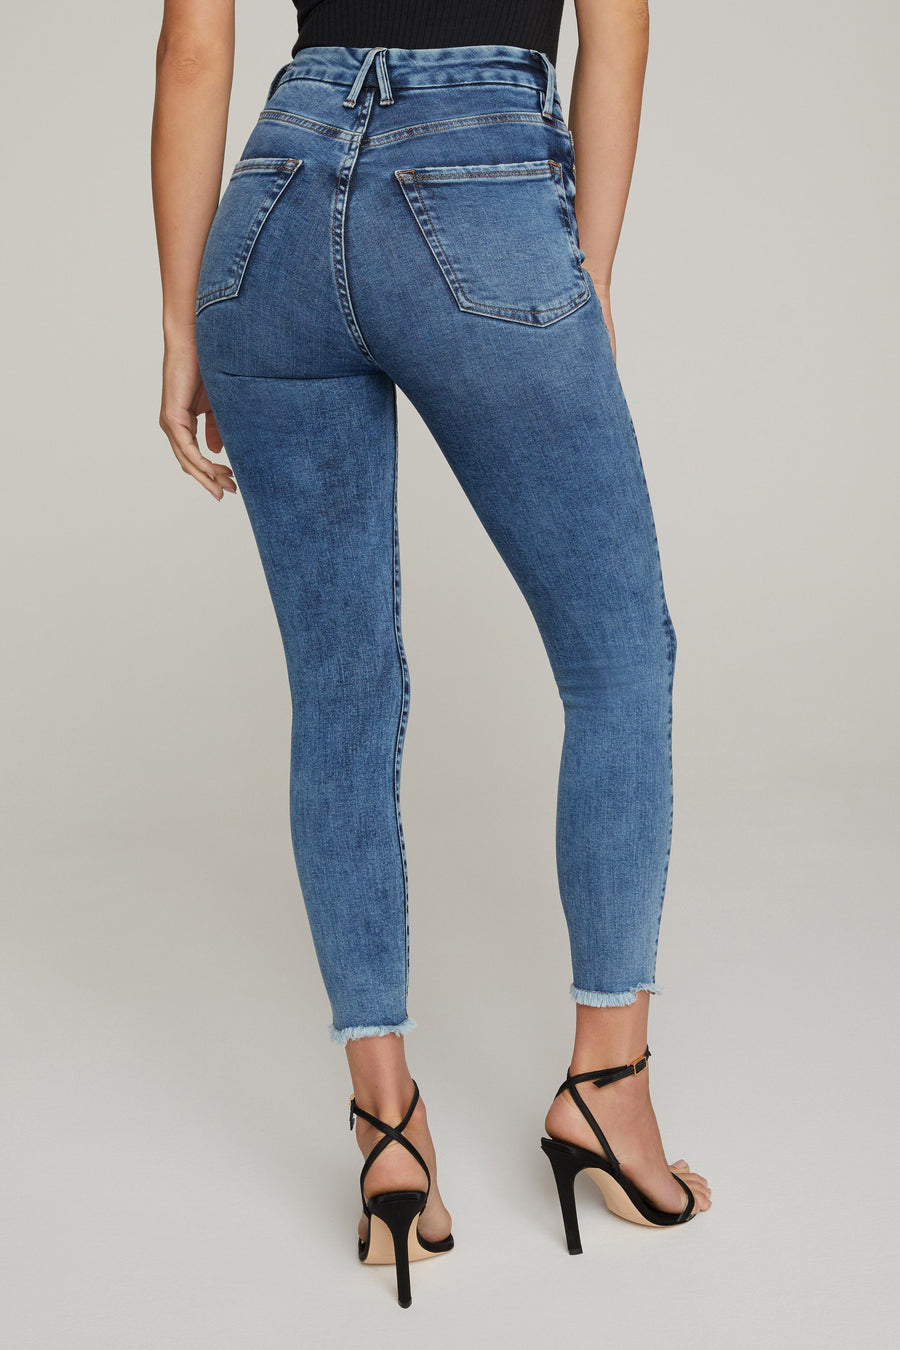 GOOD WAIST SKINNY CROPPED JEANS | BLUE633 - GOOD AMERICAN